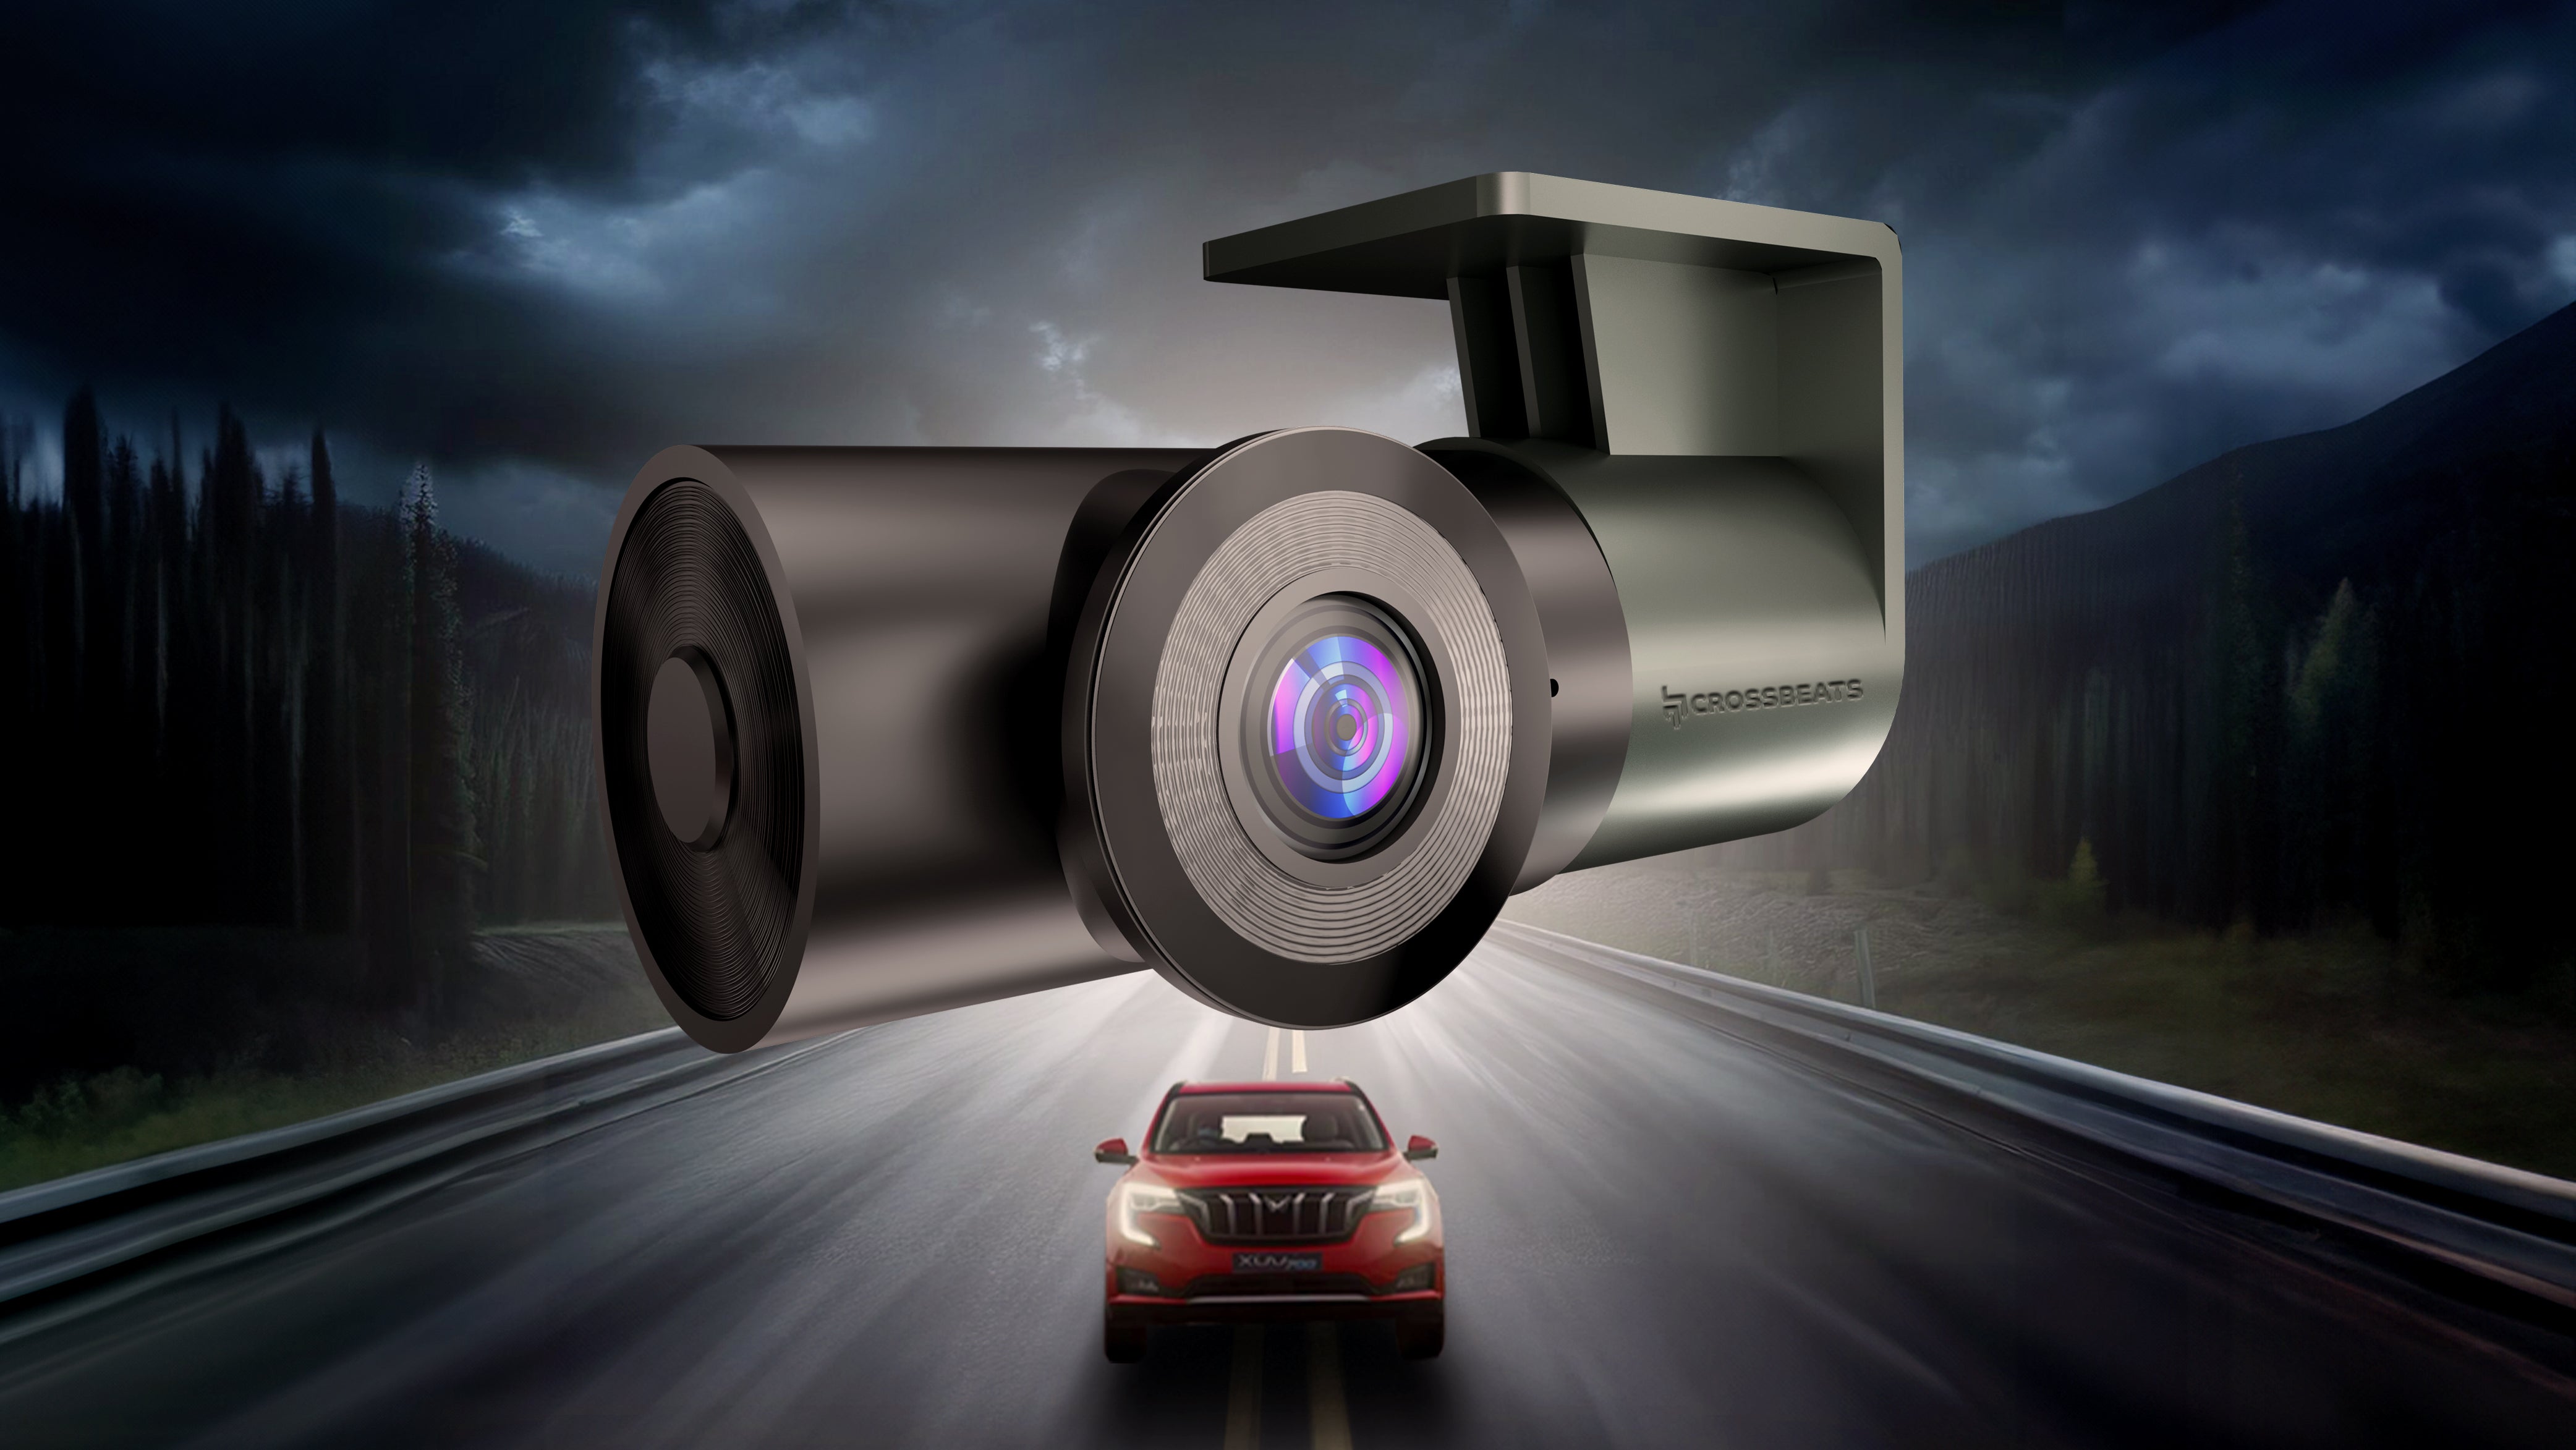 Insurance Savior: How Dash Cam Footage Can Save You Become a Financially Prudent Driver